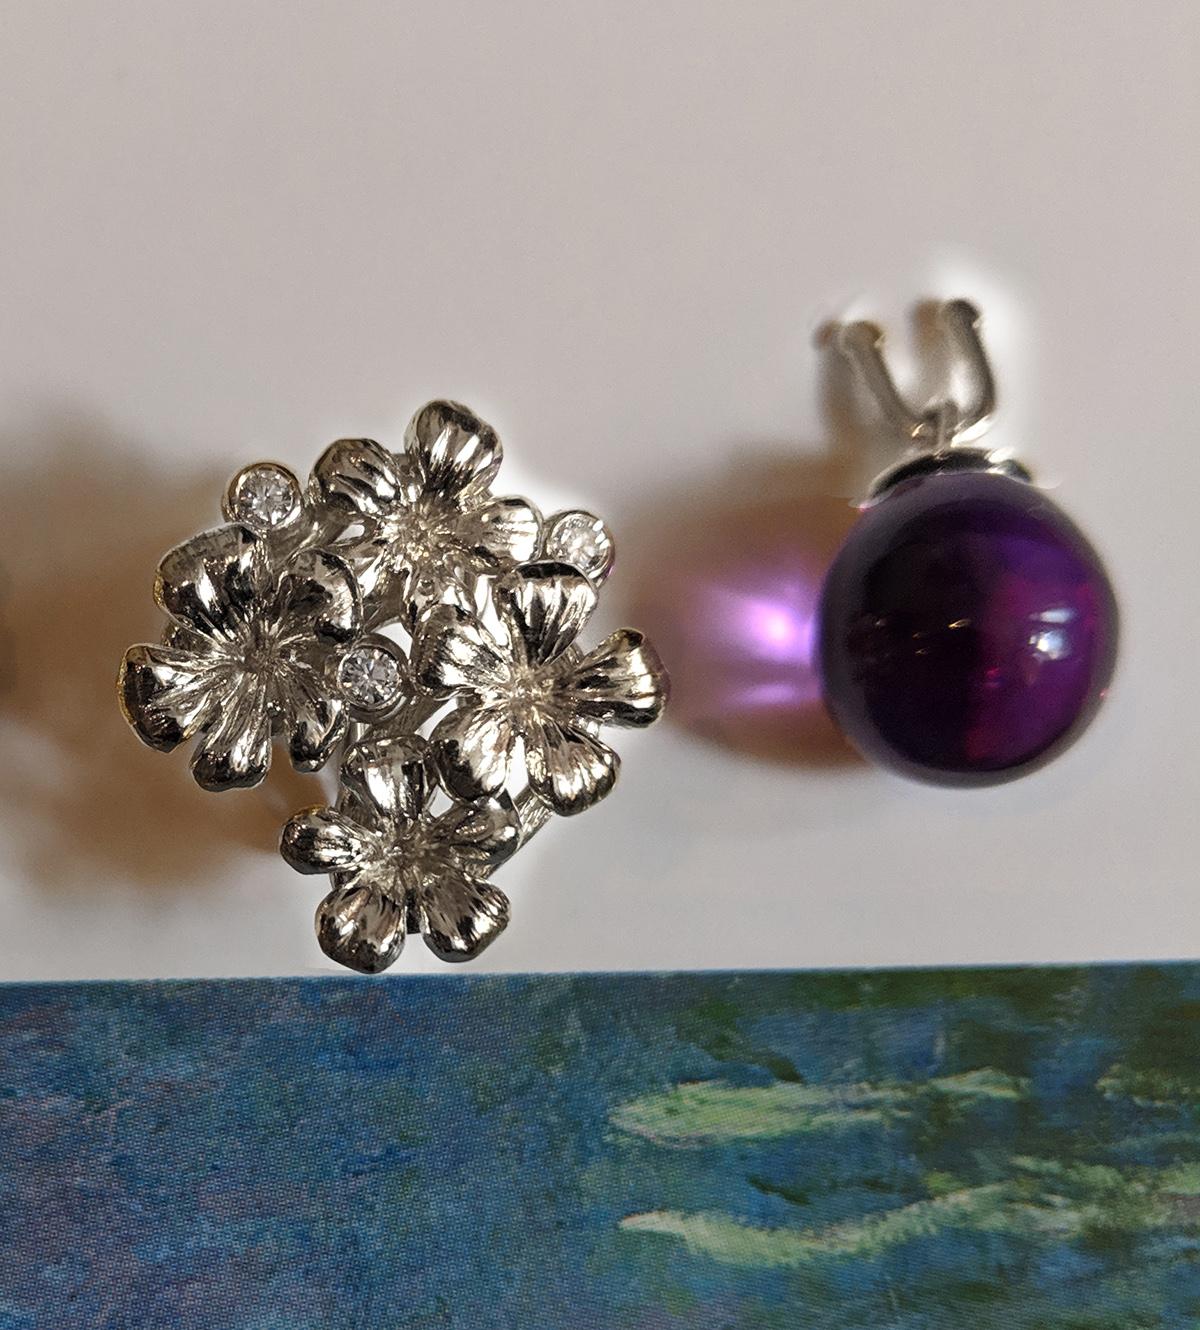 18 karat white gold Plum Blossom pendant necklace with a removable amethyst drop, encrusted with 3 round diamonds, is a contemporary jewellery piece that has been featured in Vogue UA reviews. The cabochon gem can be easily replaced with other gem